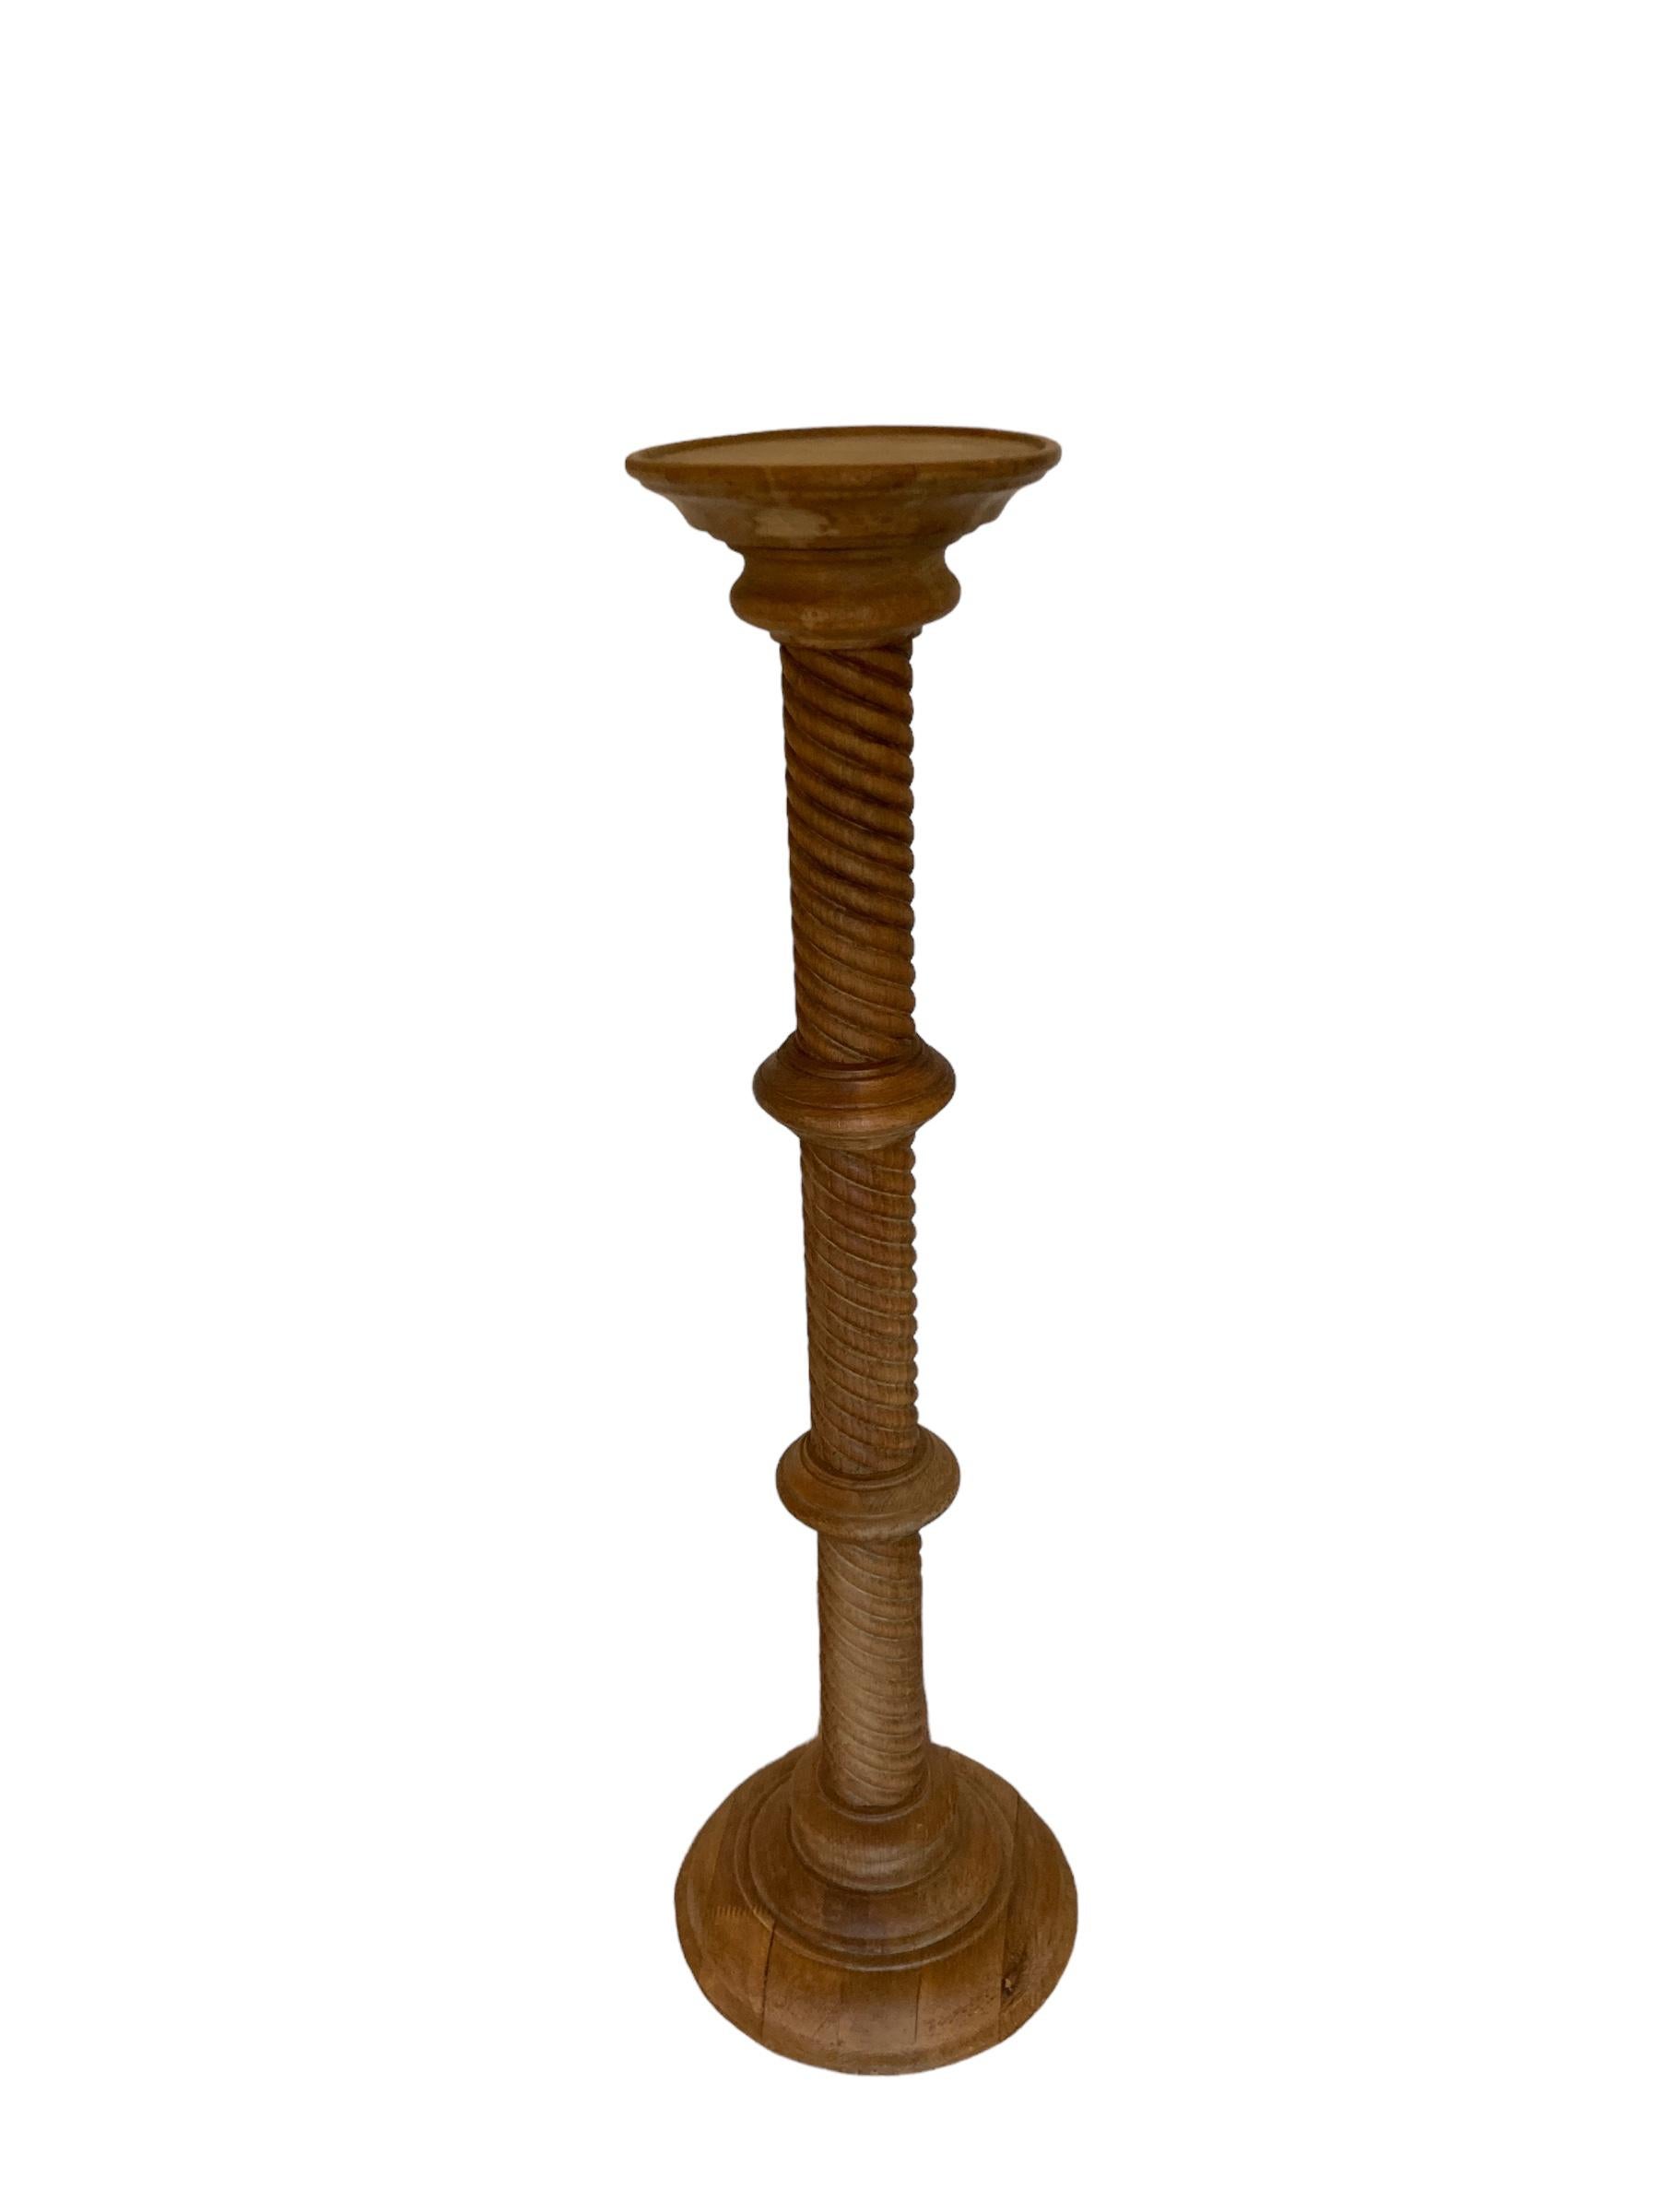 19th Century Carved light oak Pedestal Torchere with a captivating barley twist design. Crafted with precision and attention to detail, this exquisite piece adds a touch of sophistication to any space. Made from light Oak, its sturdy construction